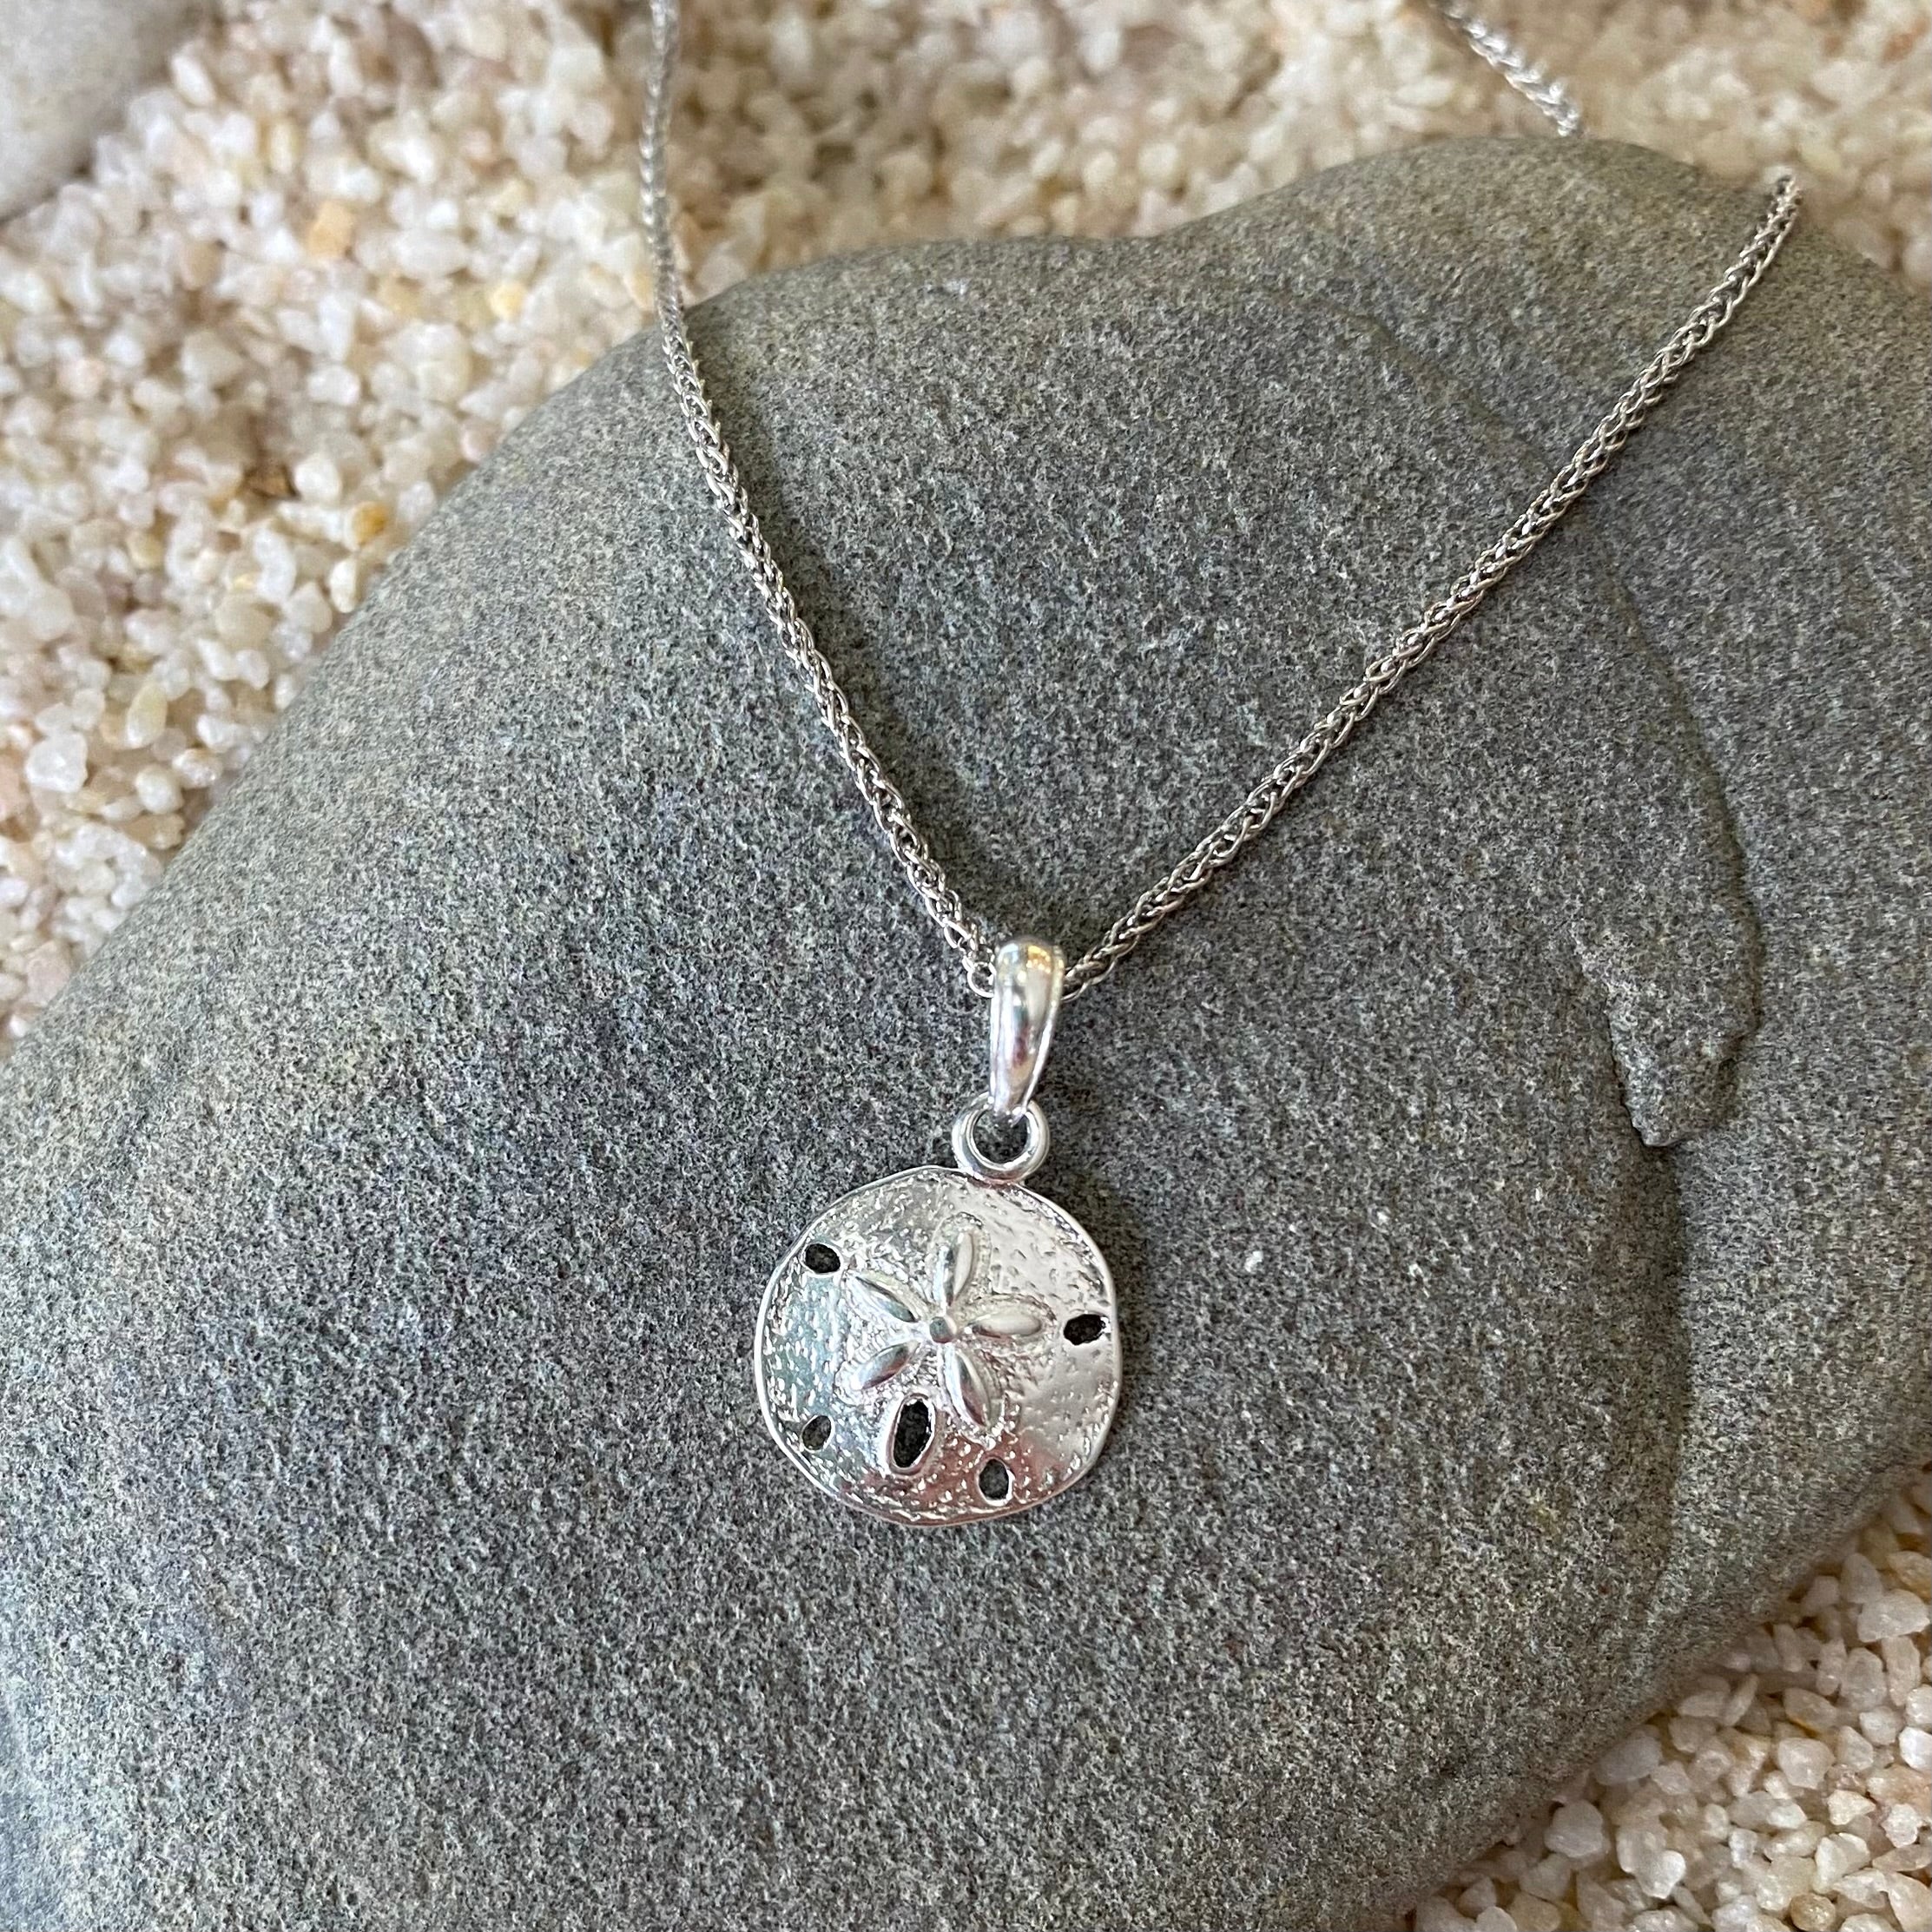 Buy Sand Dollar Necklace Online in India - Etsy